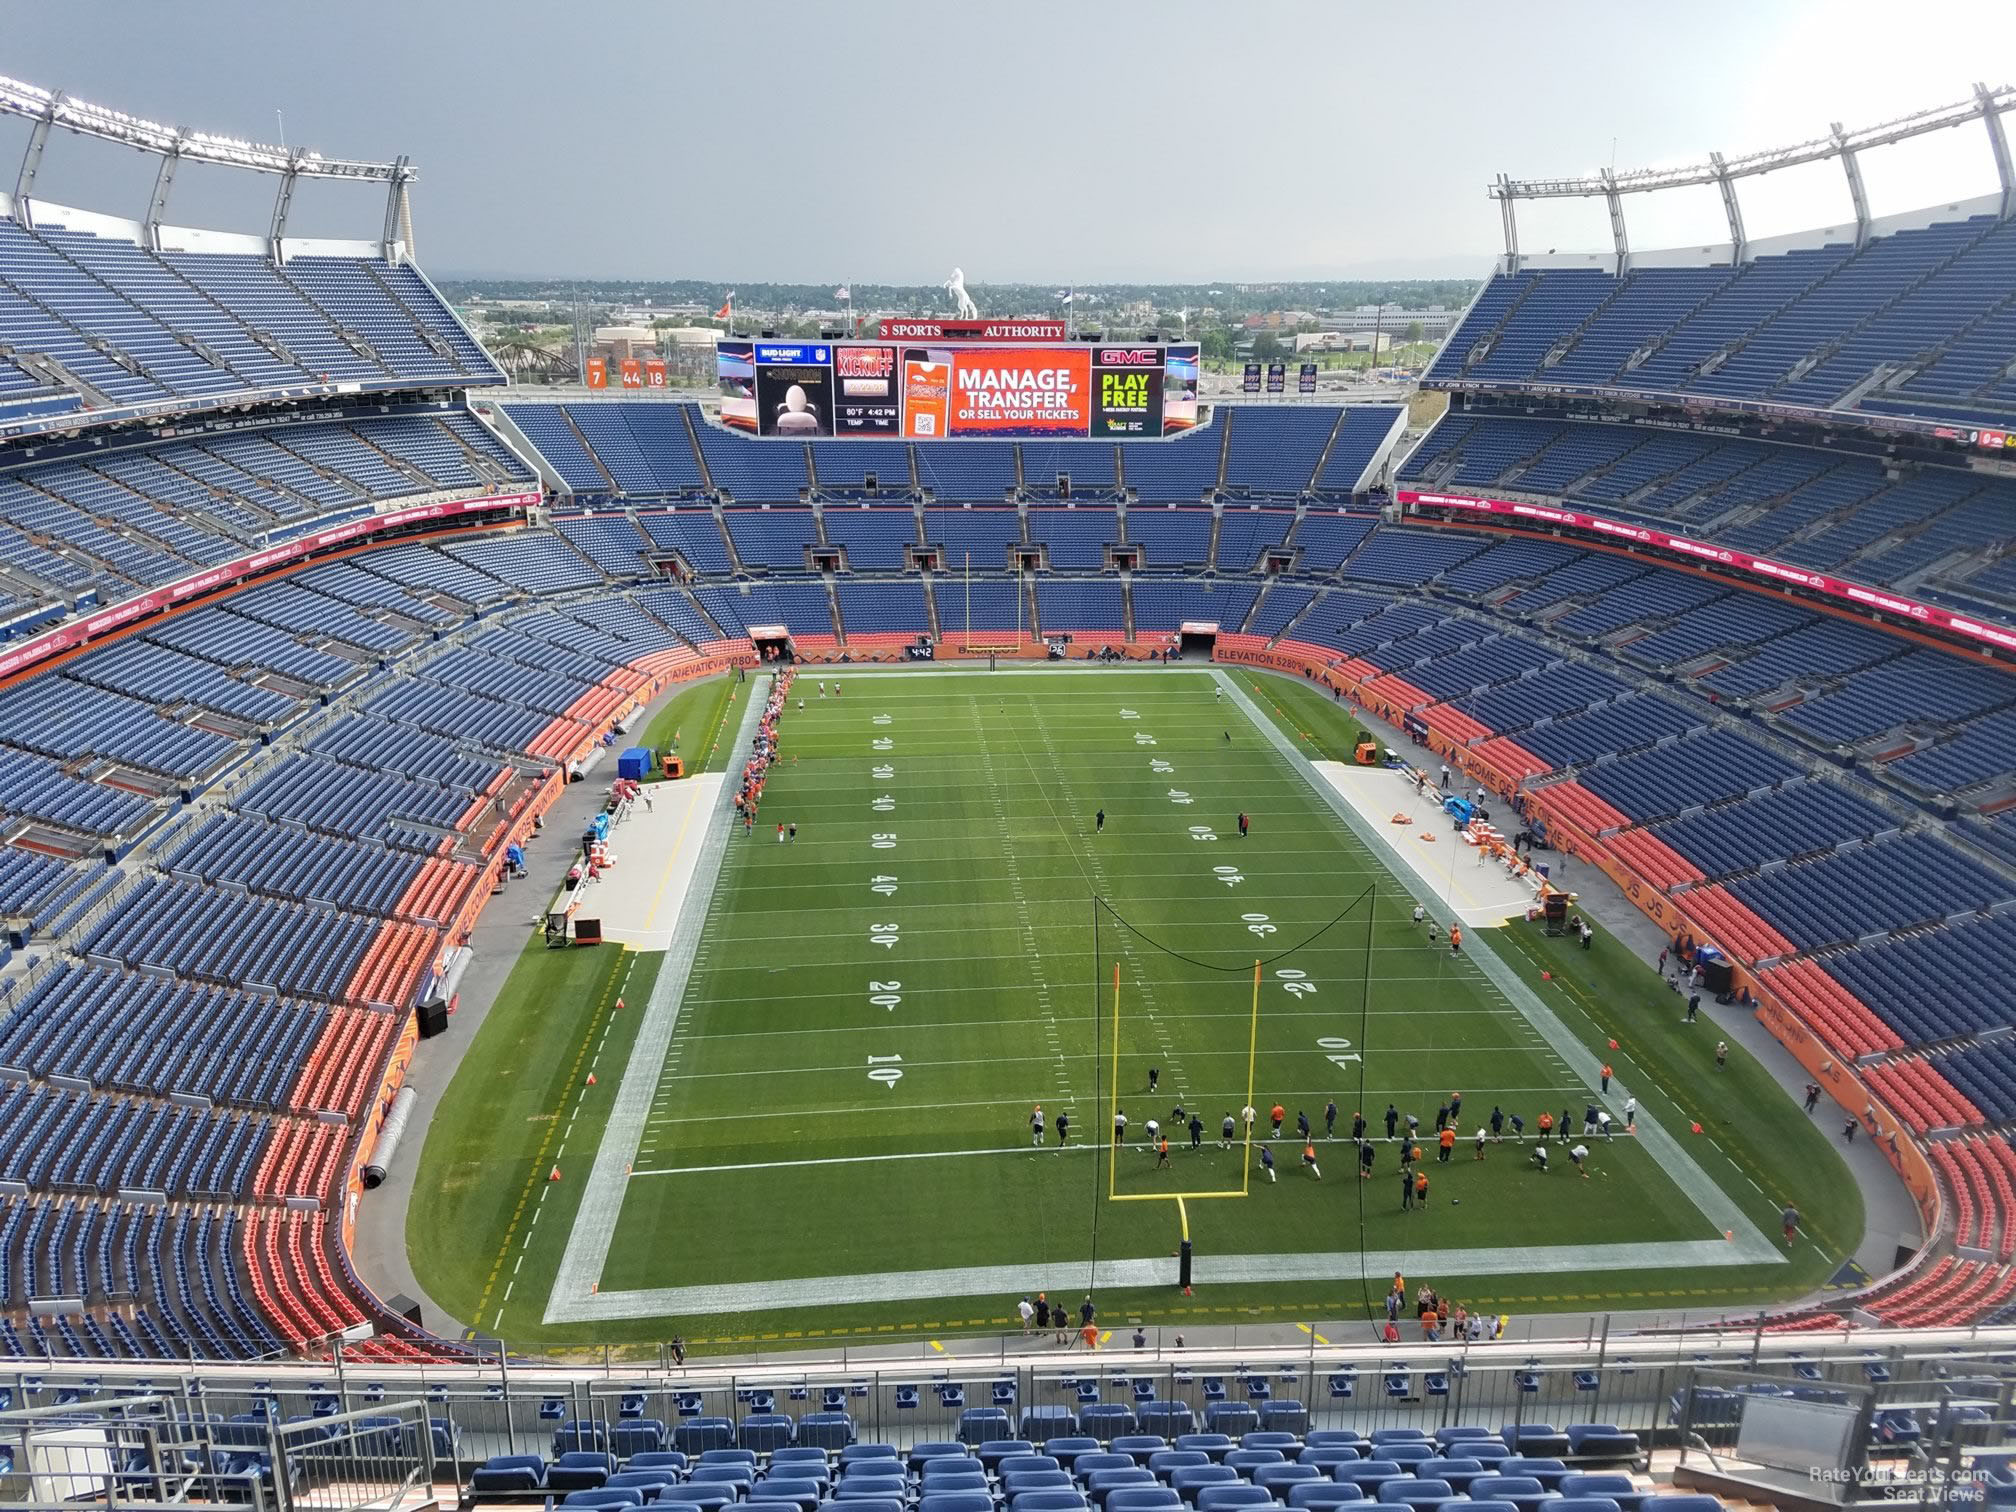 section 522, row 16 seat view  - empower field (at mile high)